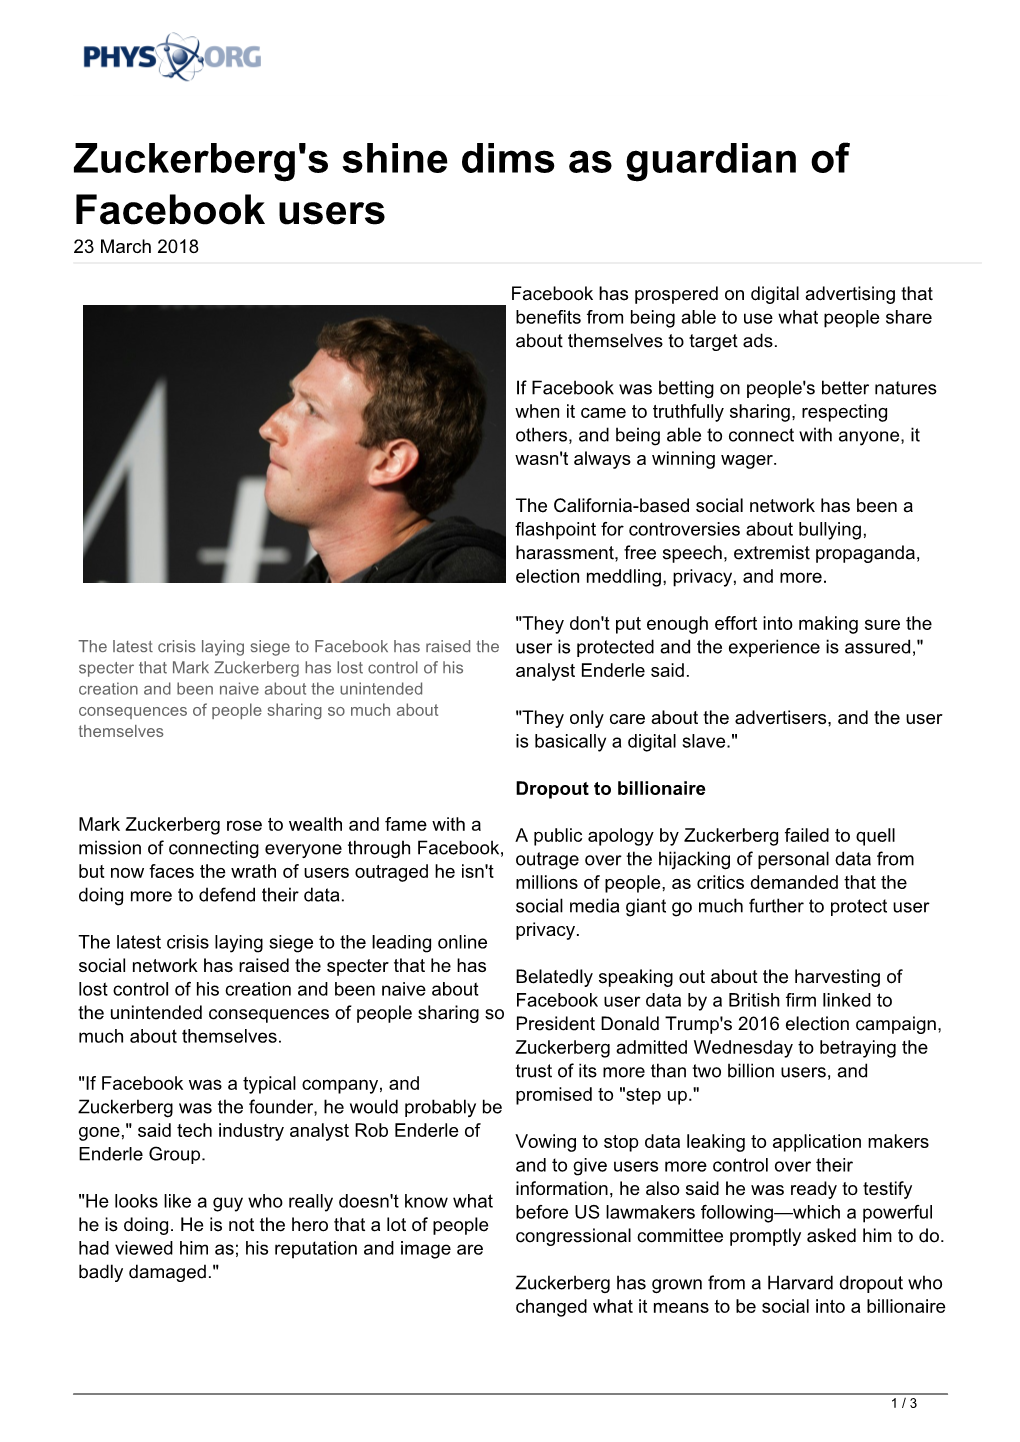 Zuckerberg's Shine Dims As Guardian of Facebook Users 23 March 2018